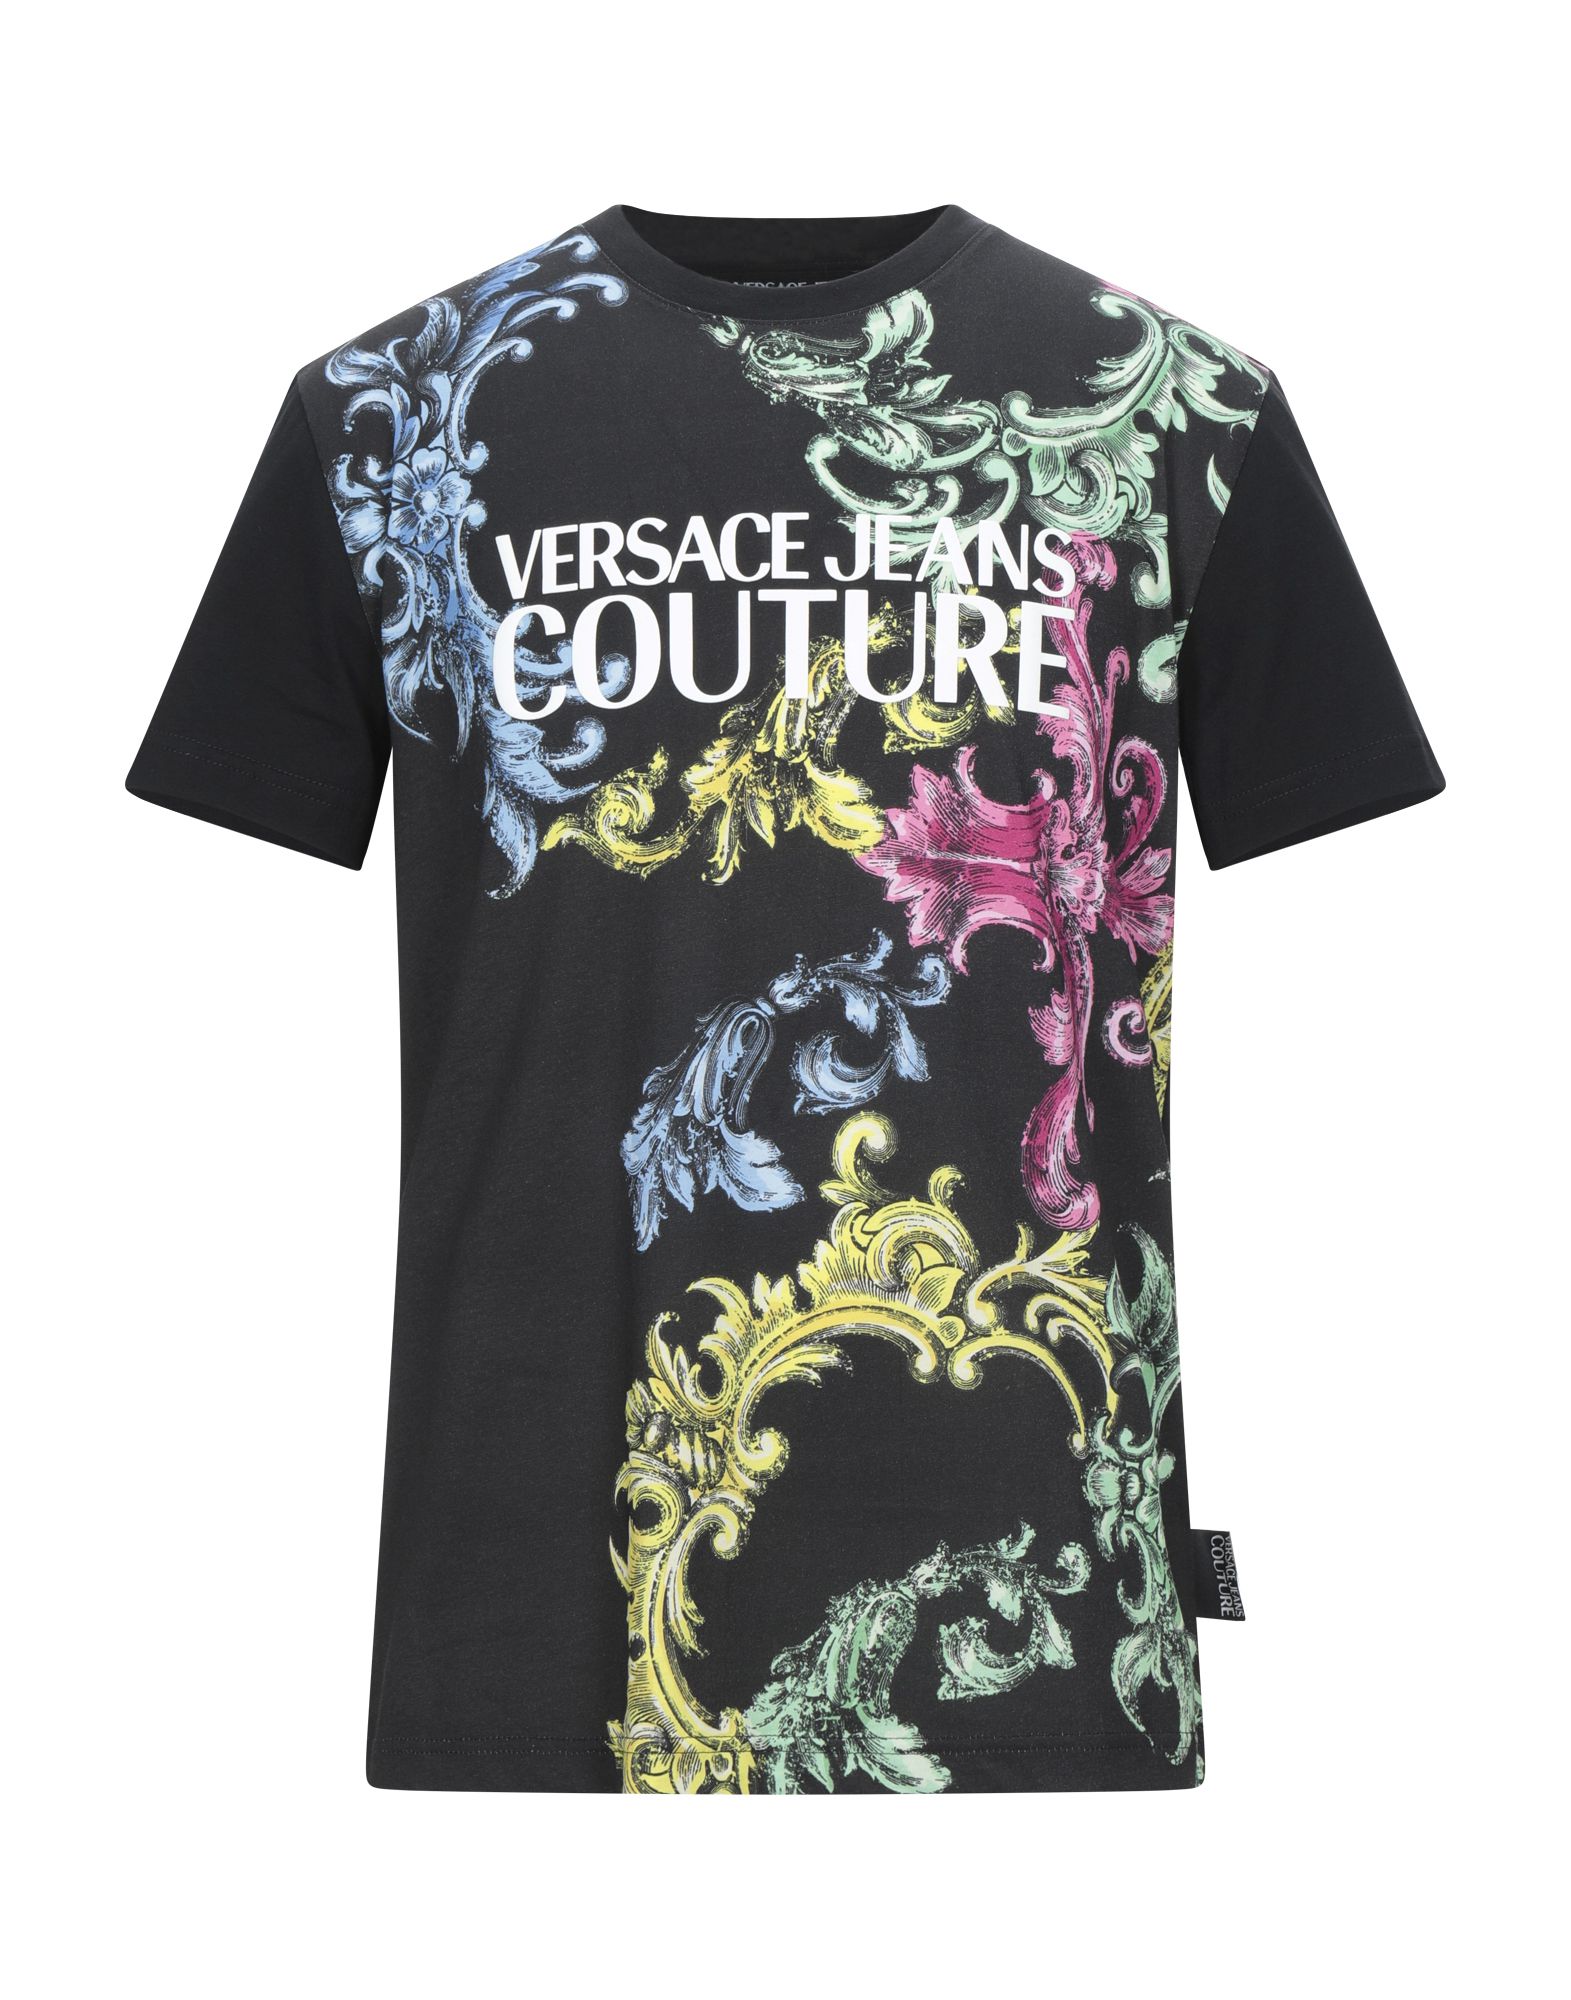 VERSACE JEANS COUTURE T-shirts - Item 12485811